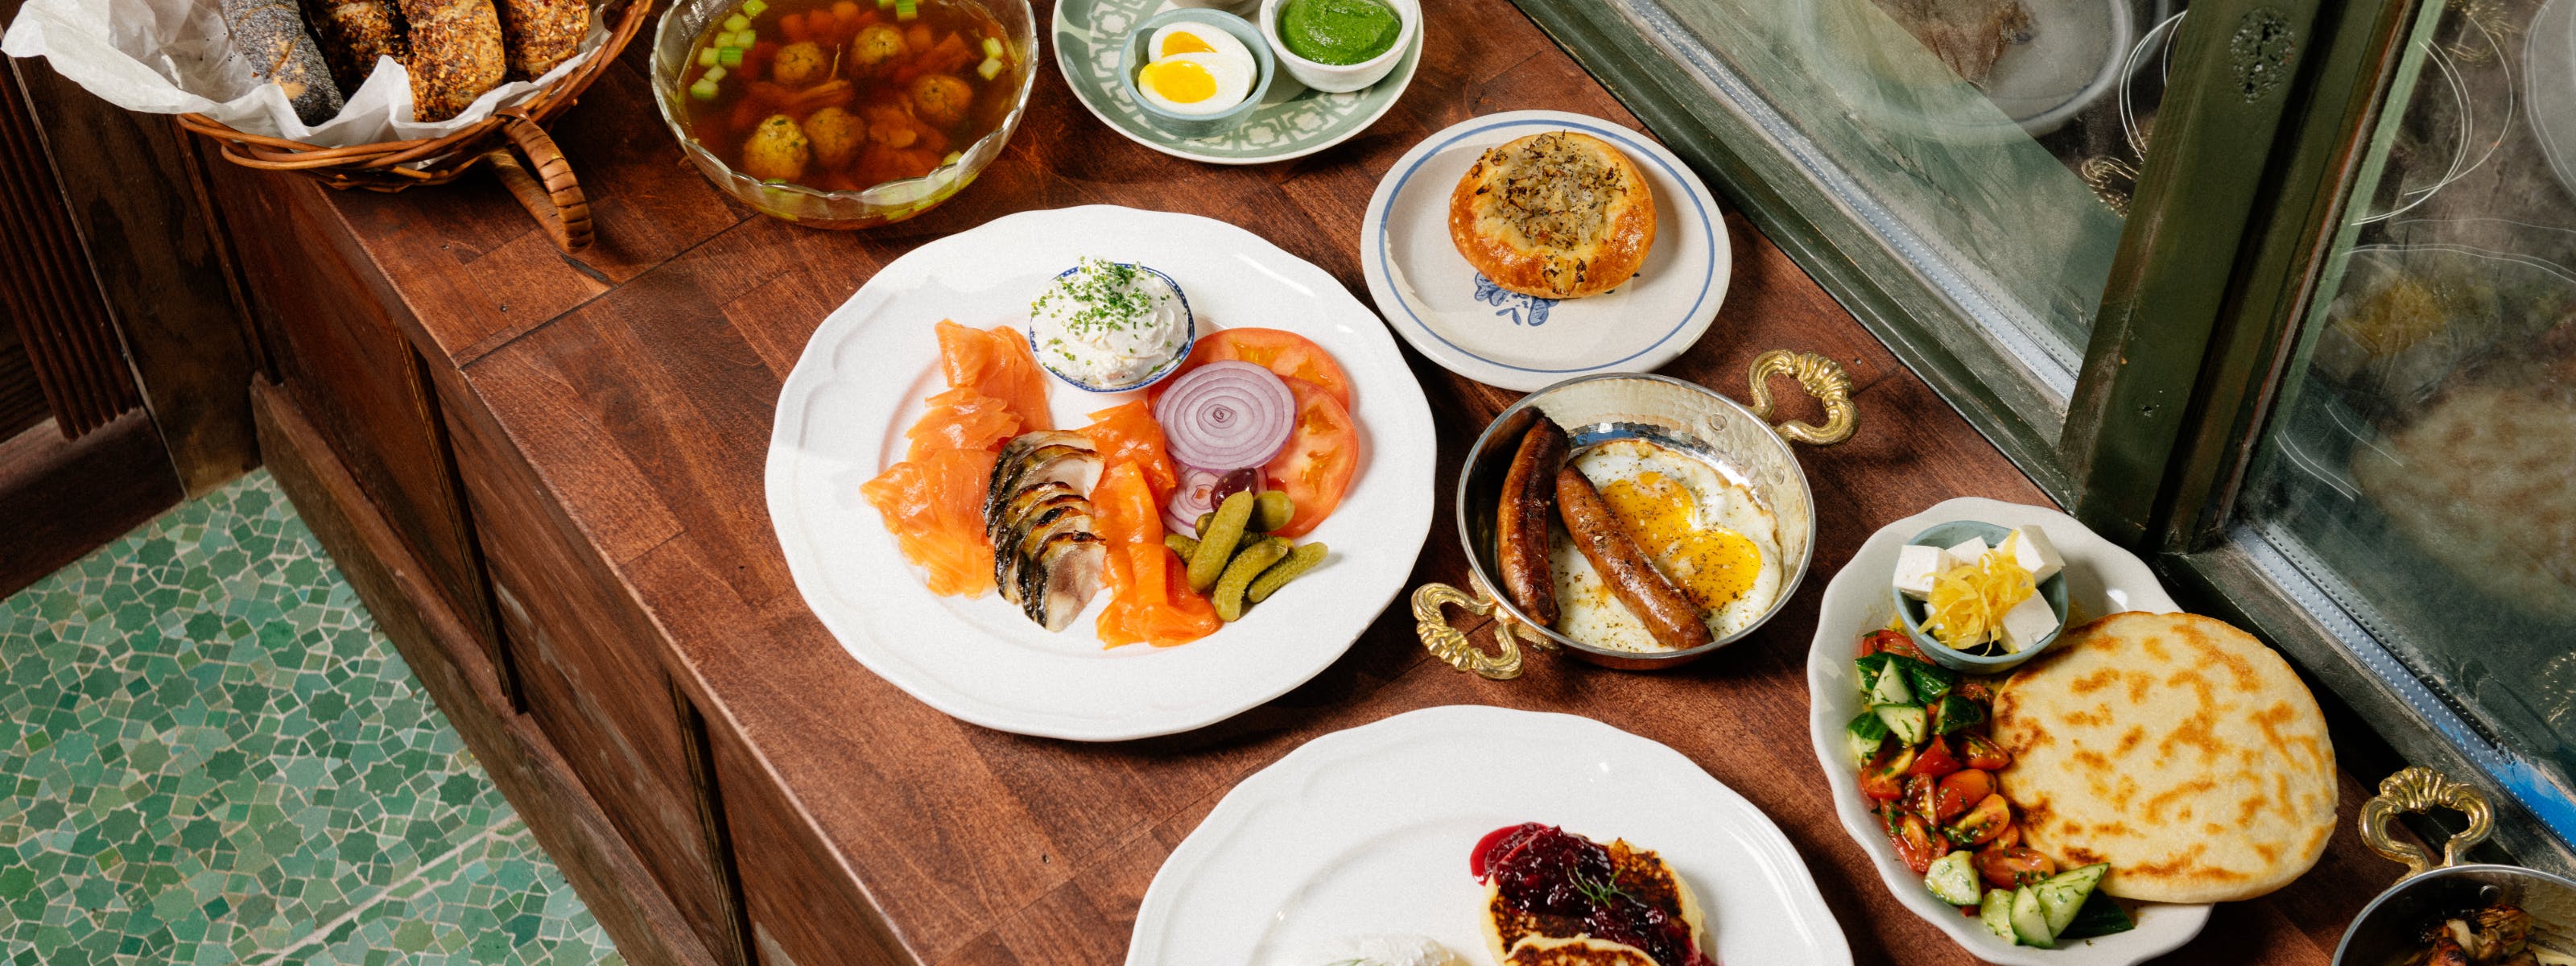 After a Sold-Out Run as a Pop-Up, Edith's Brings Its Modern Jewish Cooking  to Williamsburg - Eater NY